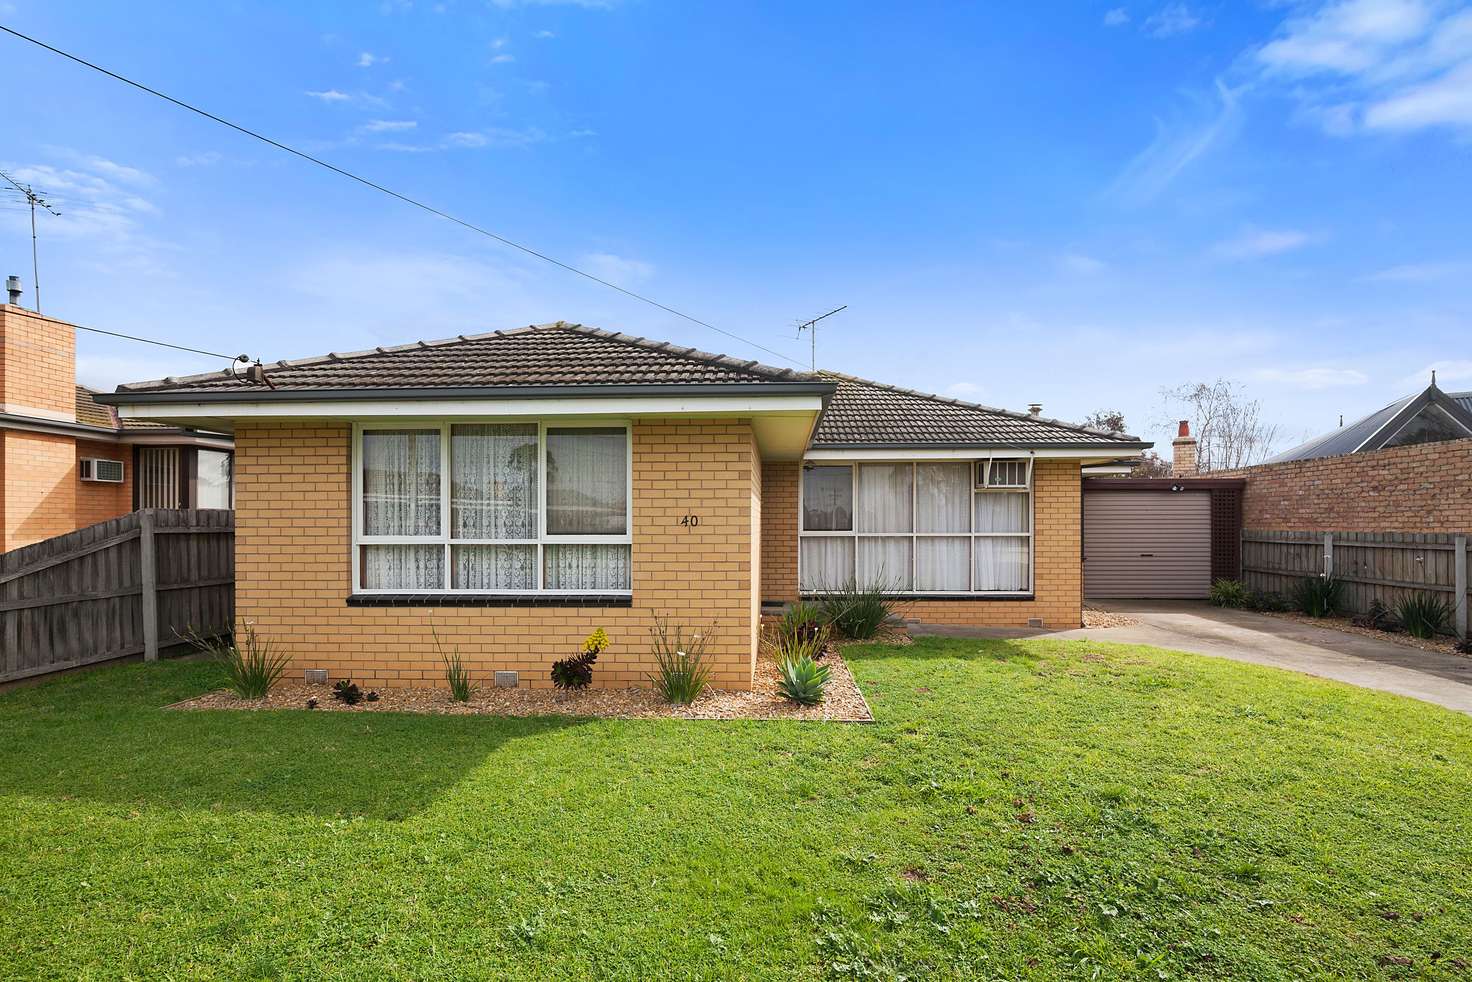 Main view of Homely house listing, 40 Donax Road, Corio VIC 3214